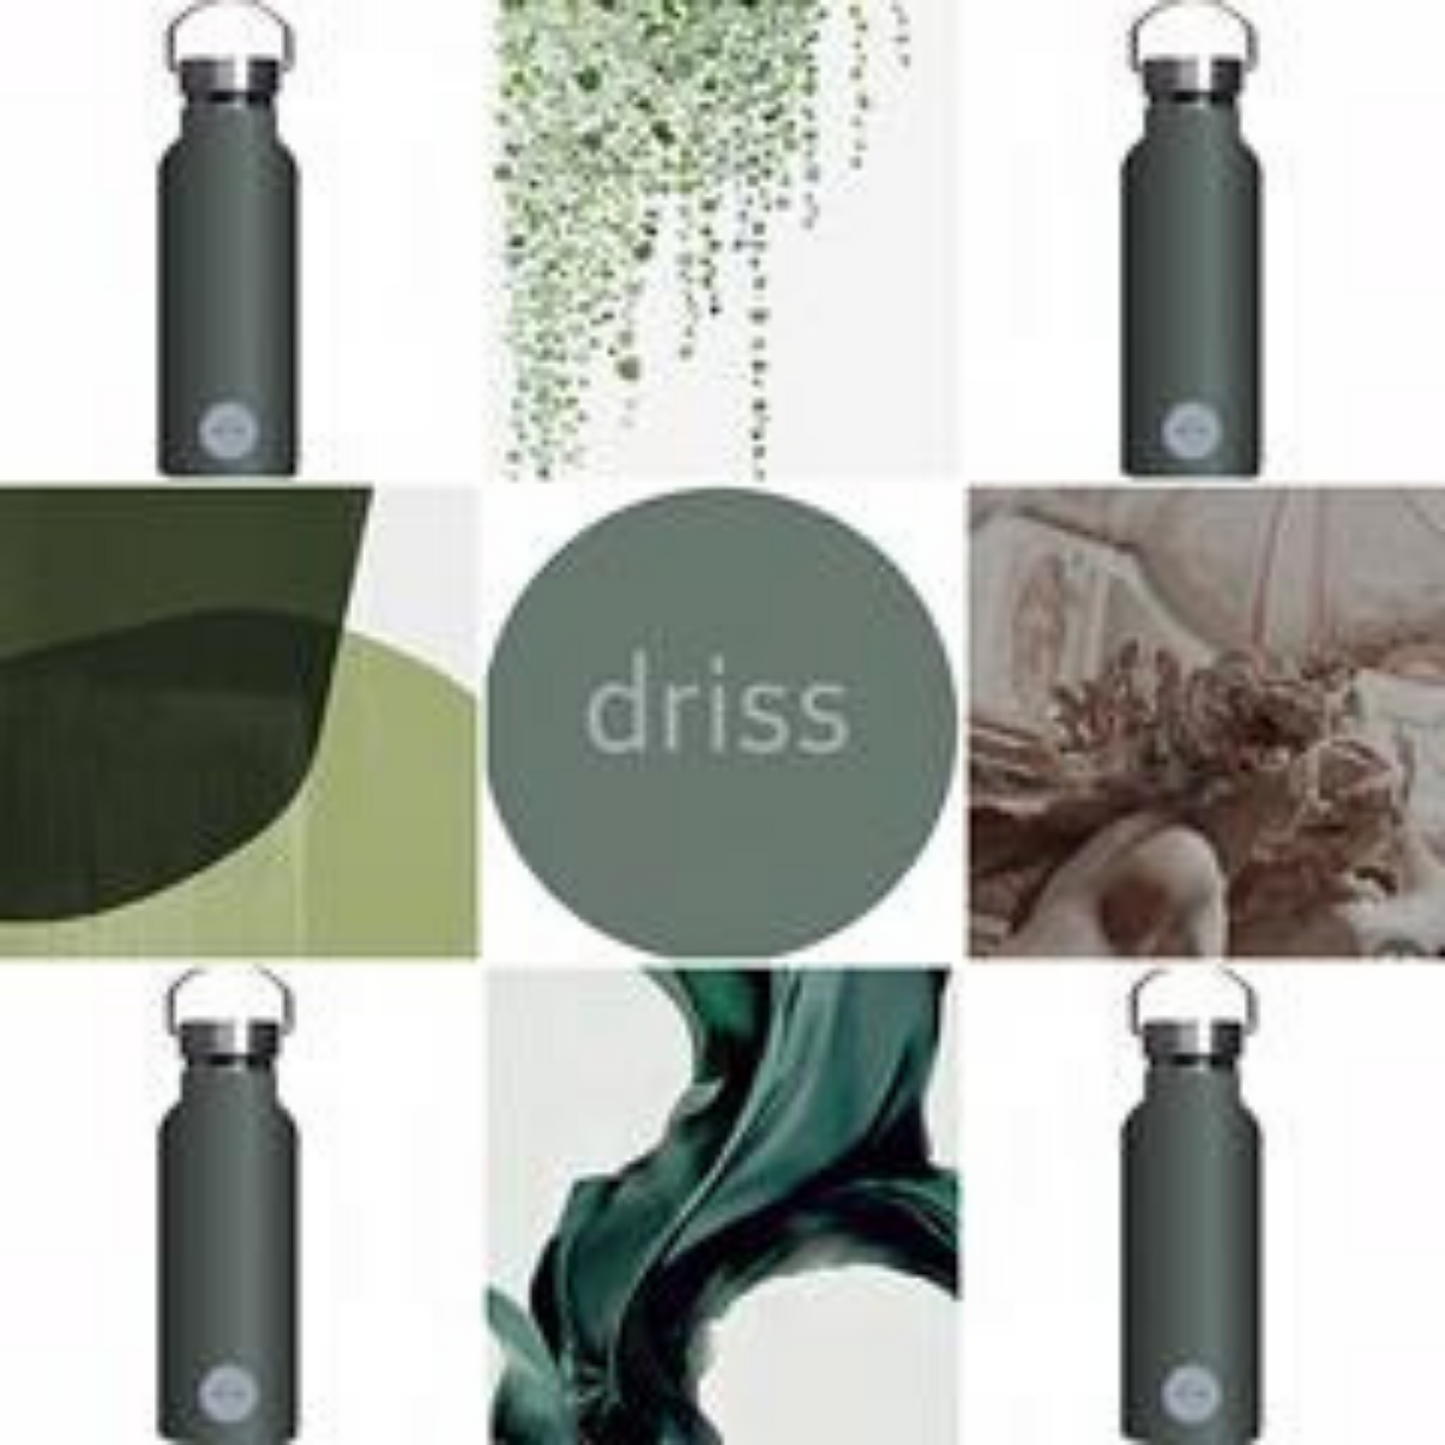 PORTER GREEN - Double Walled Insulated Drink Flask | Driss | Sherwood